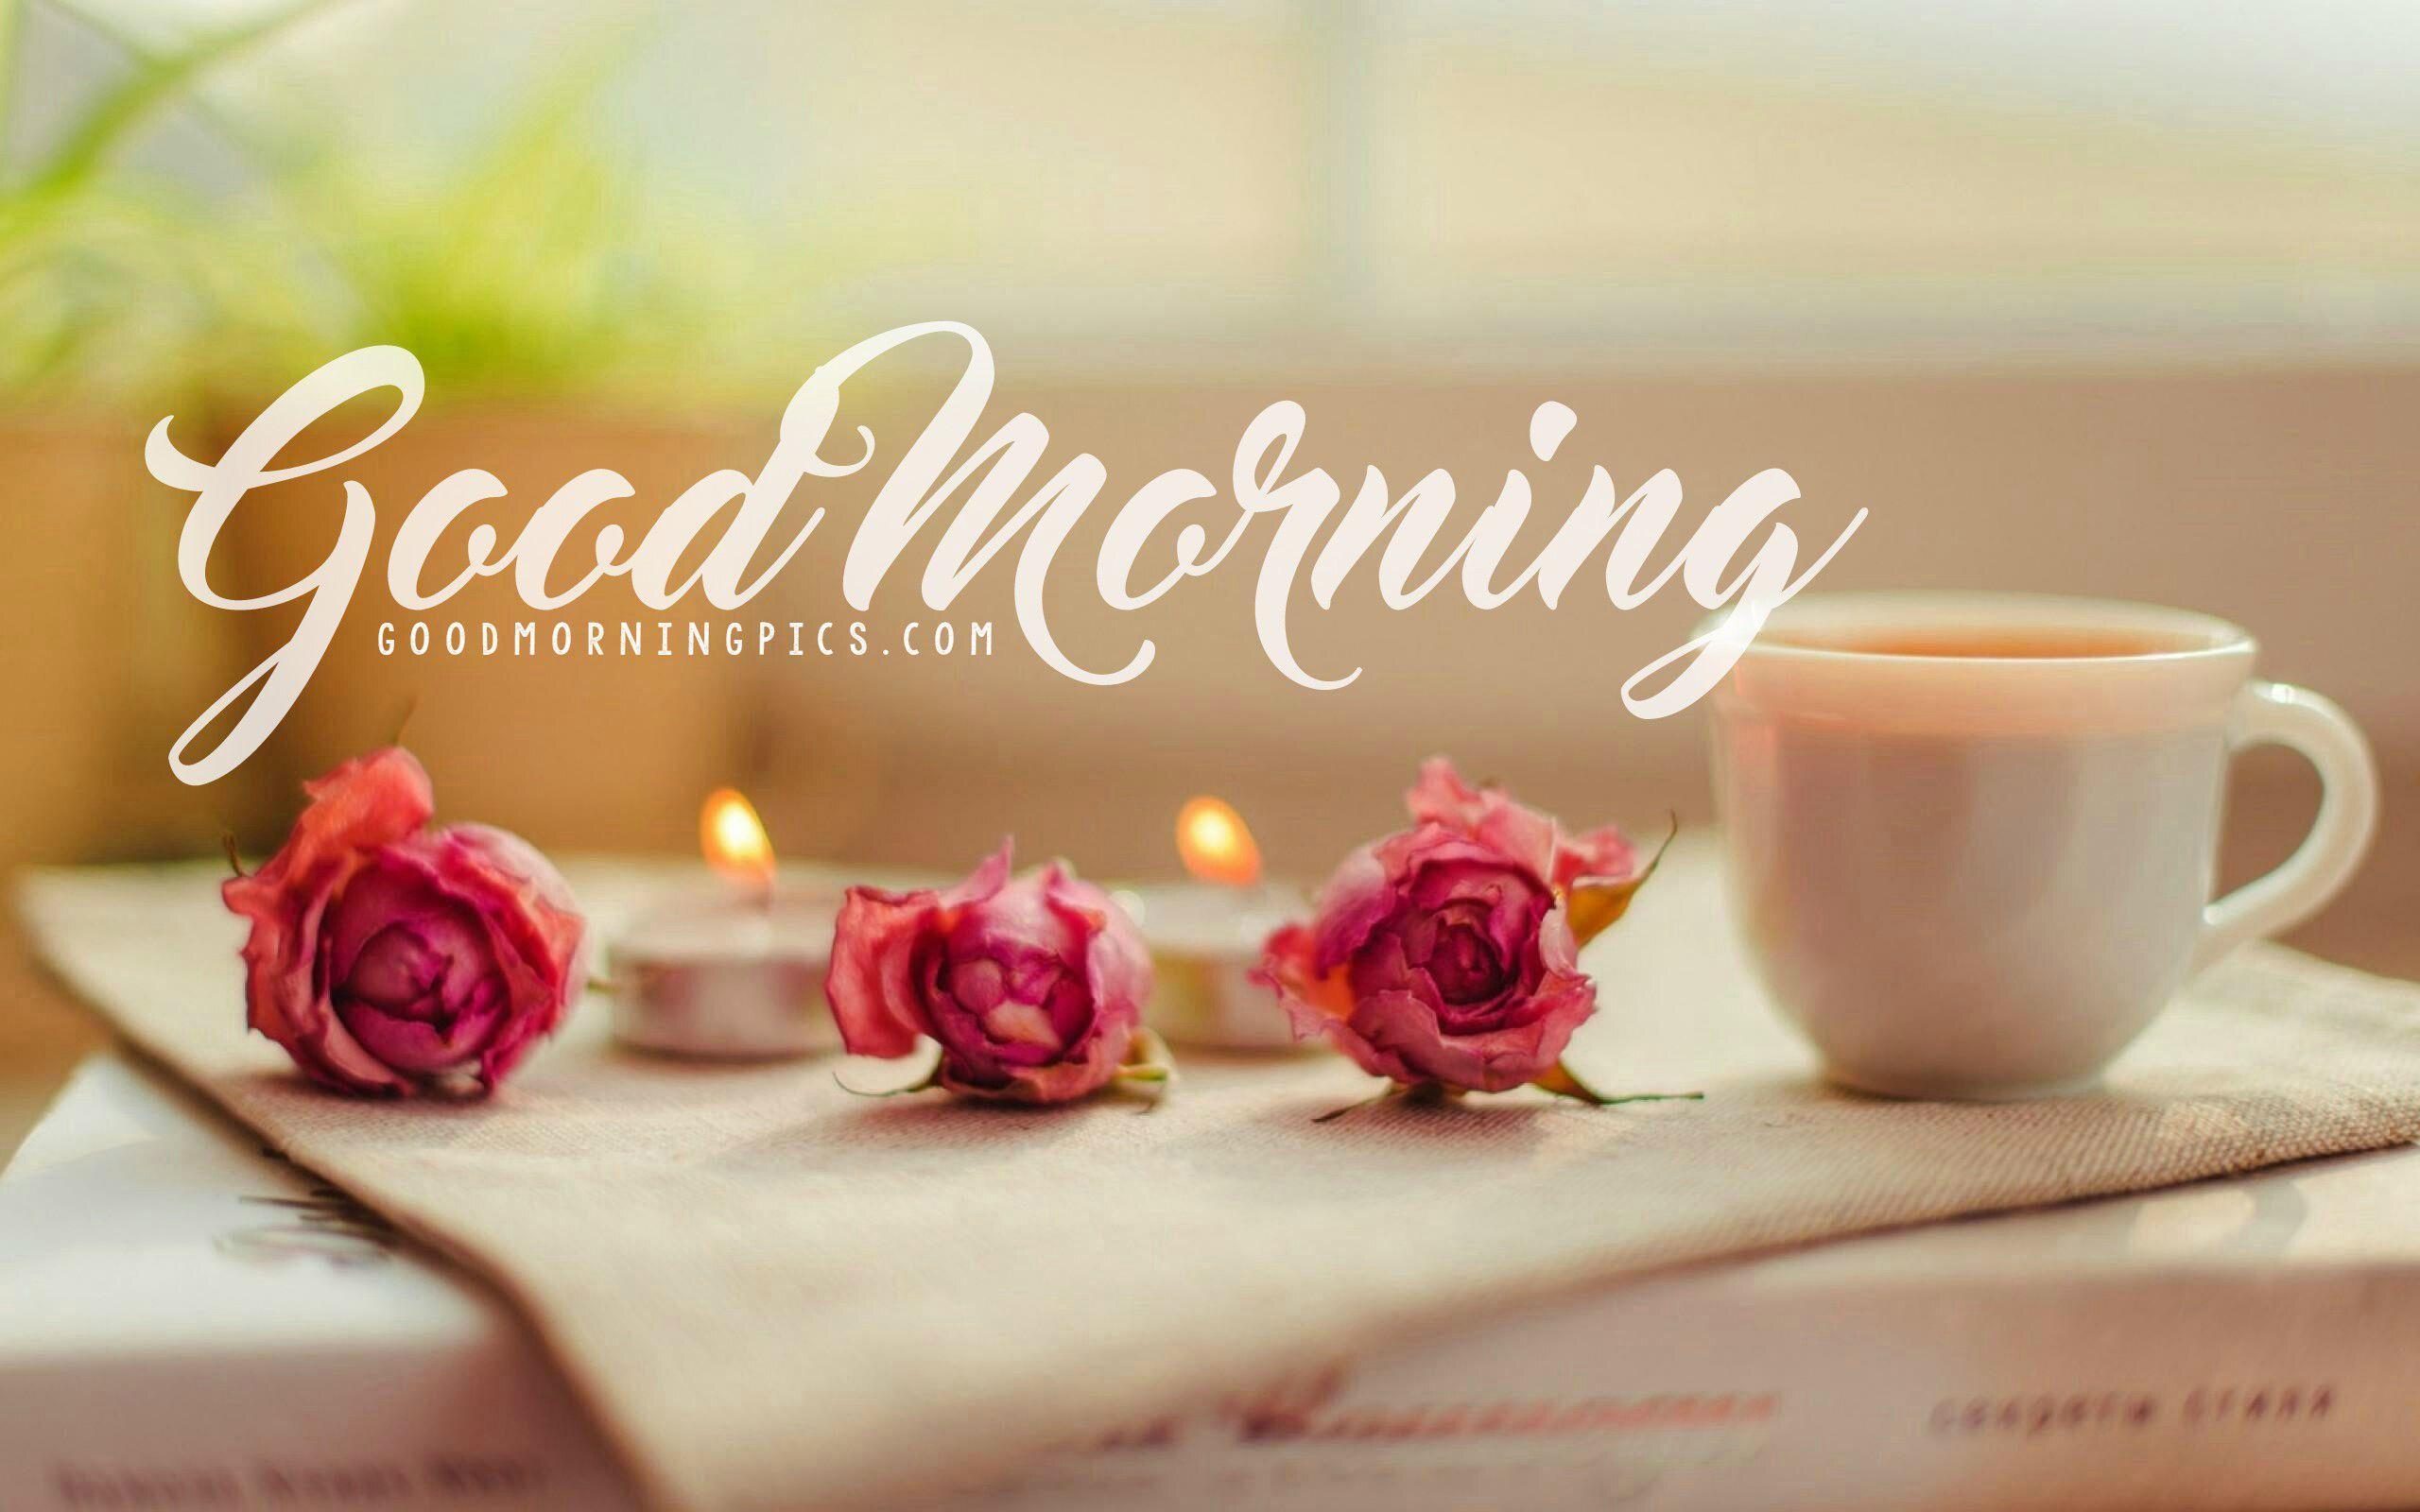 2560x1600 Good Morning Wallpapers for Android - APK Download